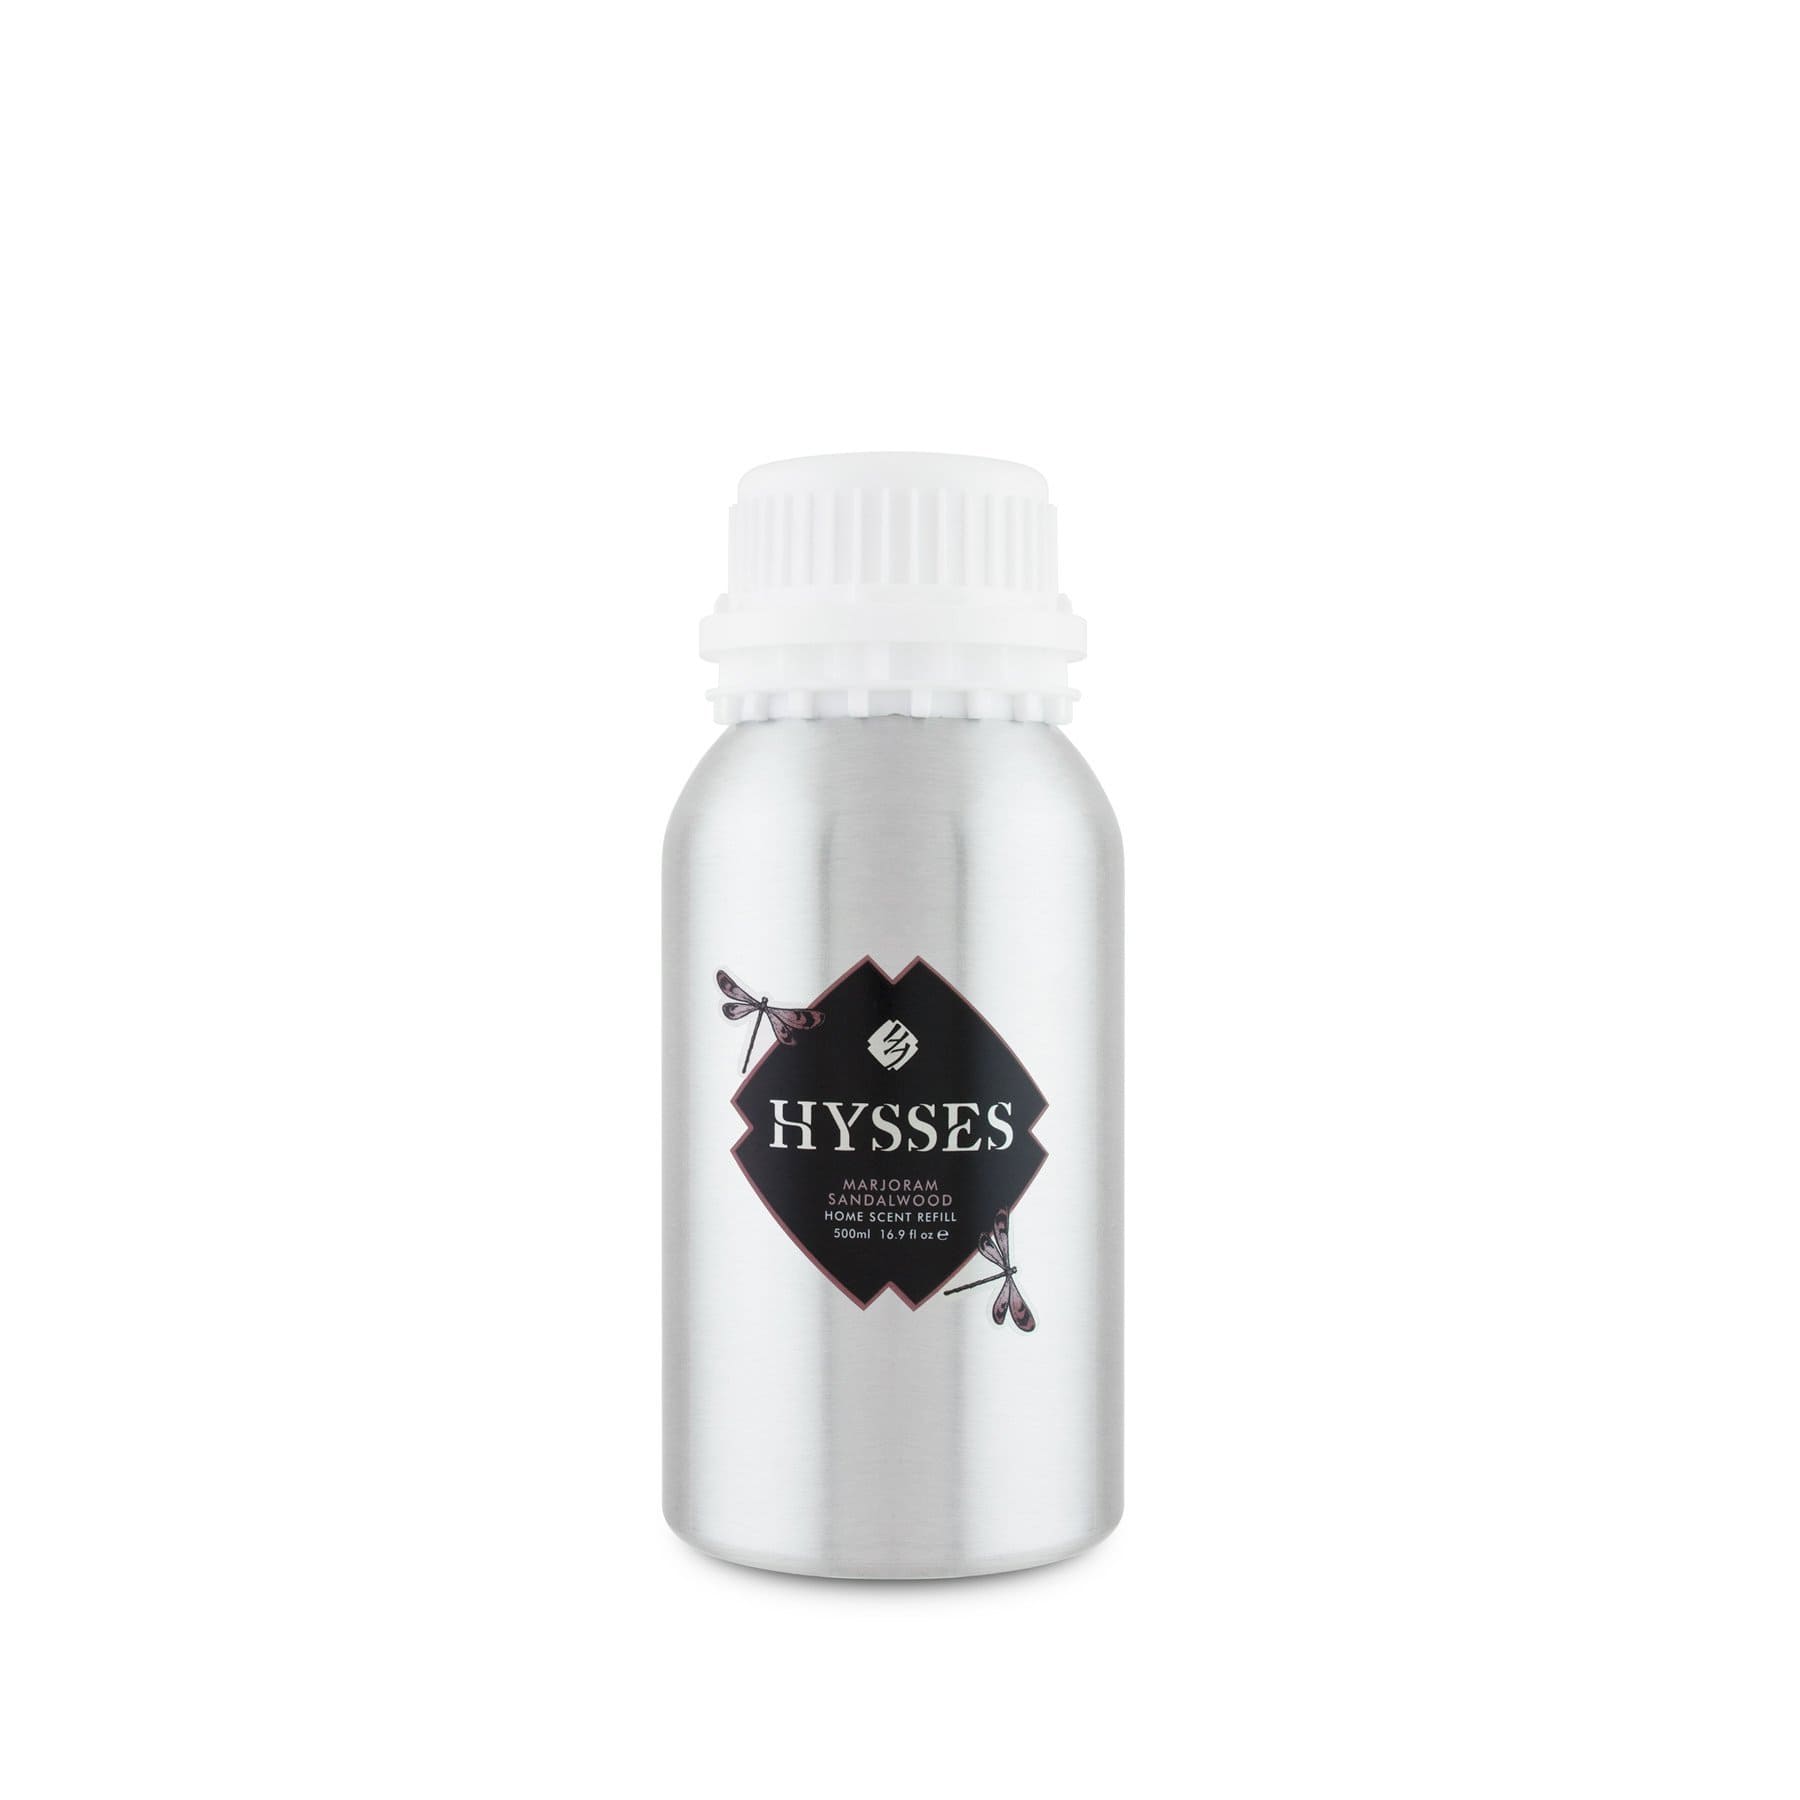 Hysses Home Scents 1000ml Refill Home Scent Marjoram Sandalwood, 1000ml